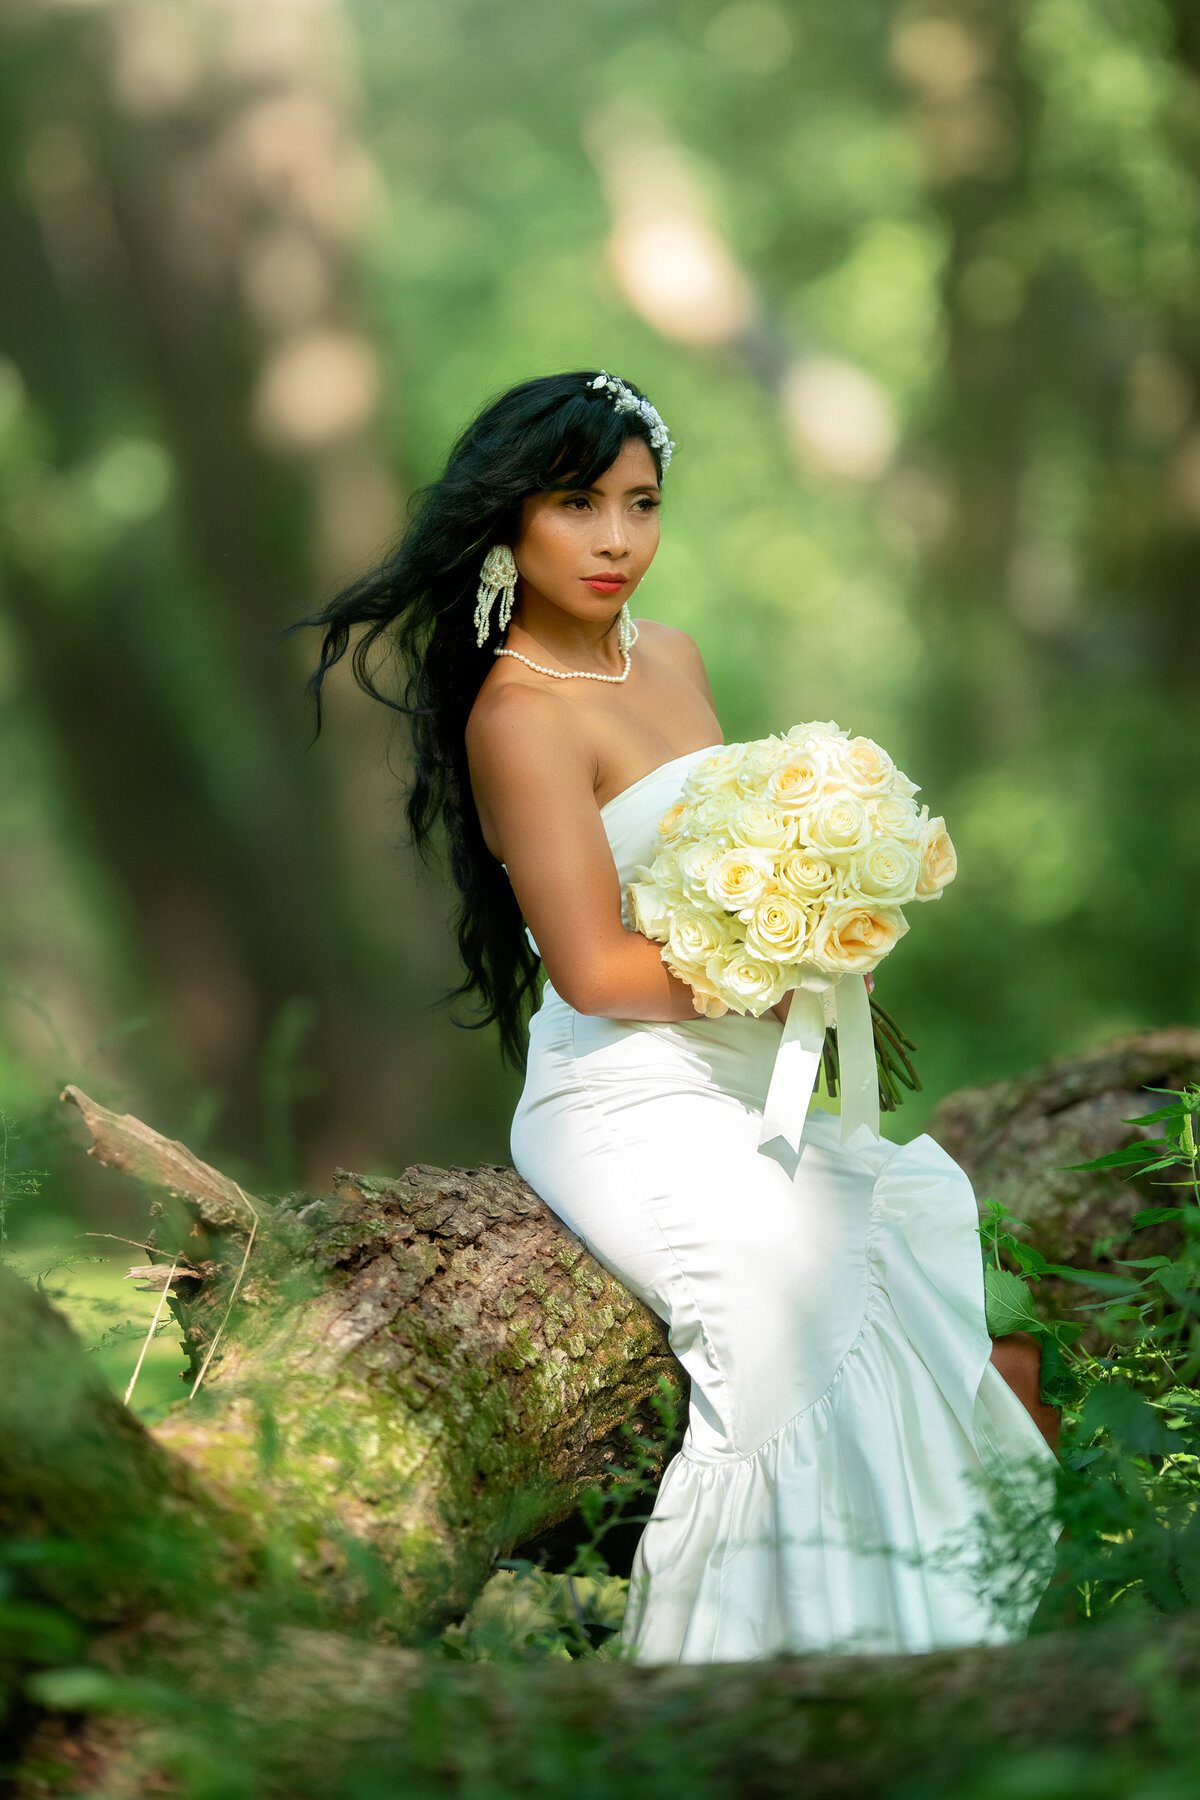 Soon to be wife is posing on the tree log  in a white wedding dress  while holding white roses